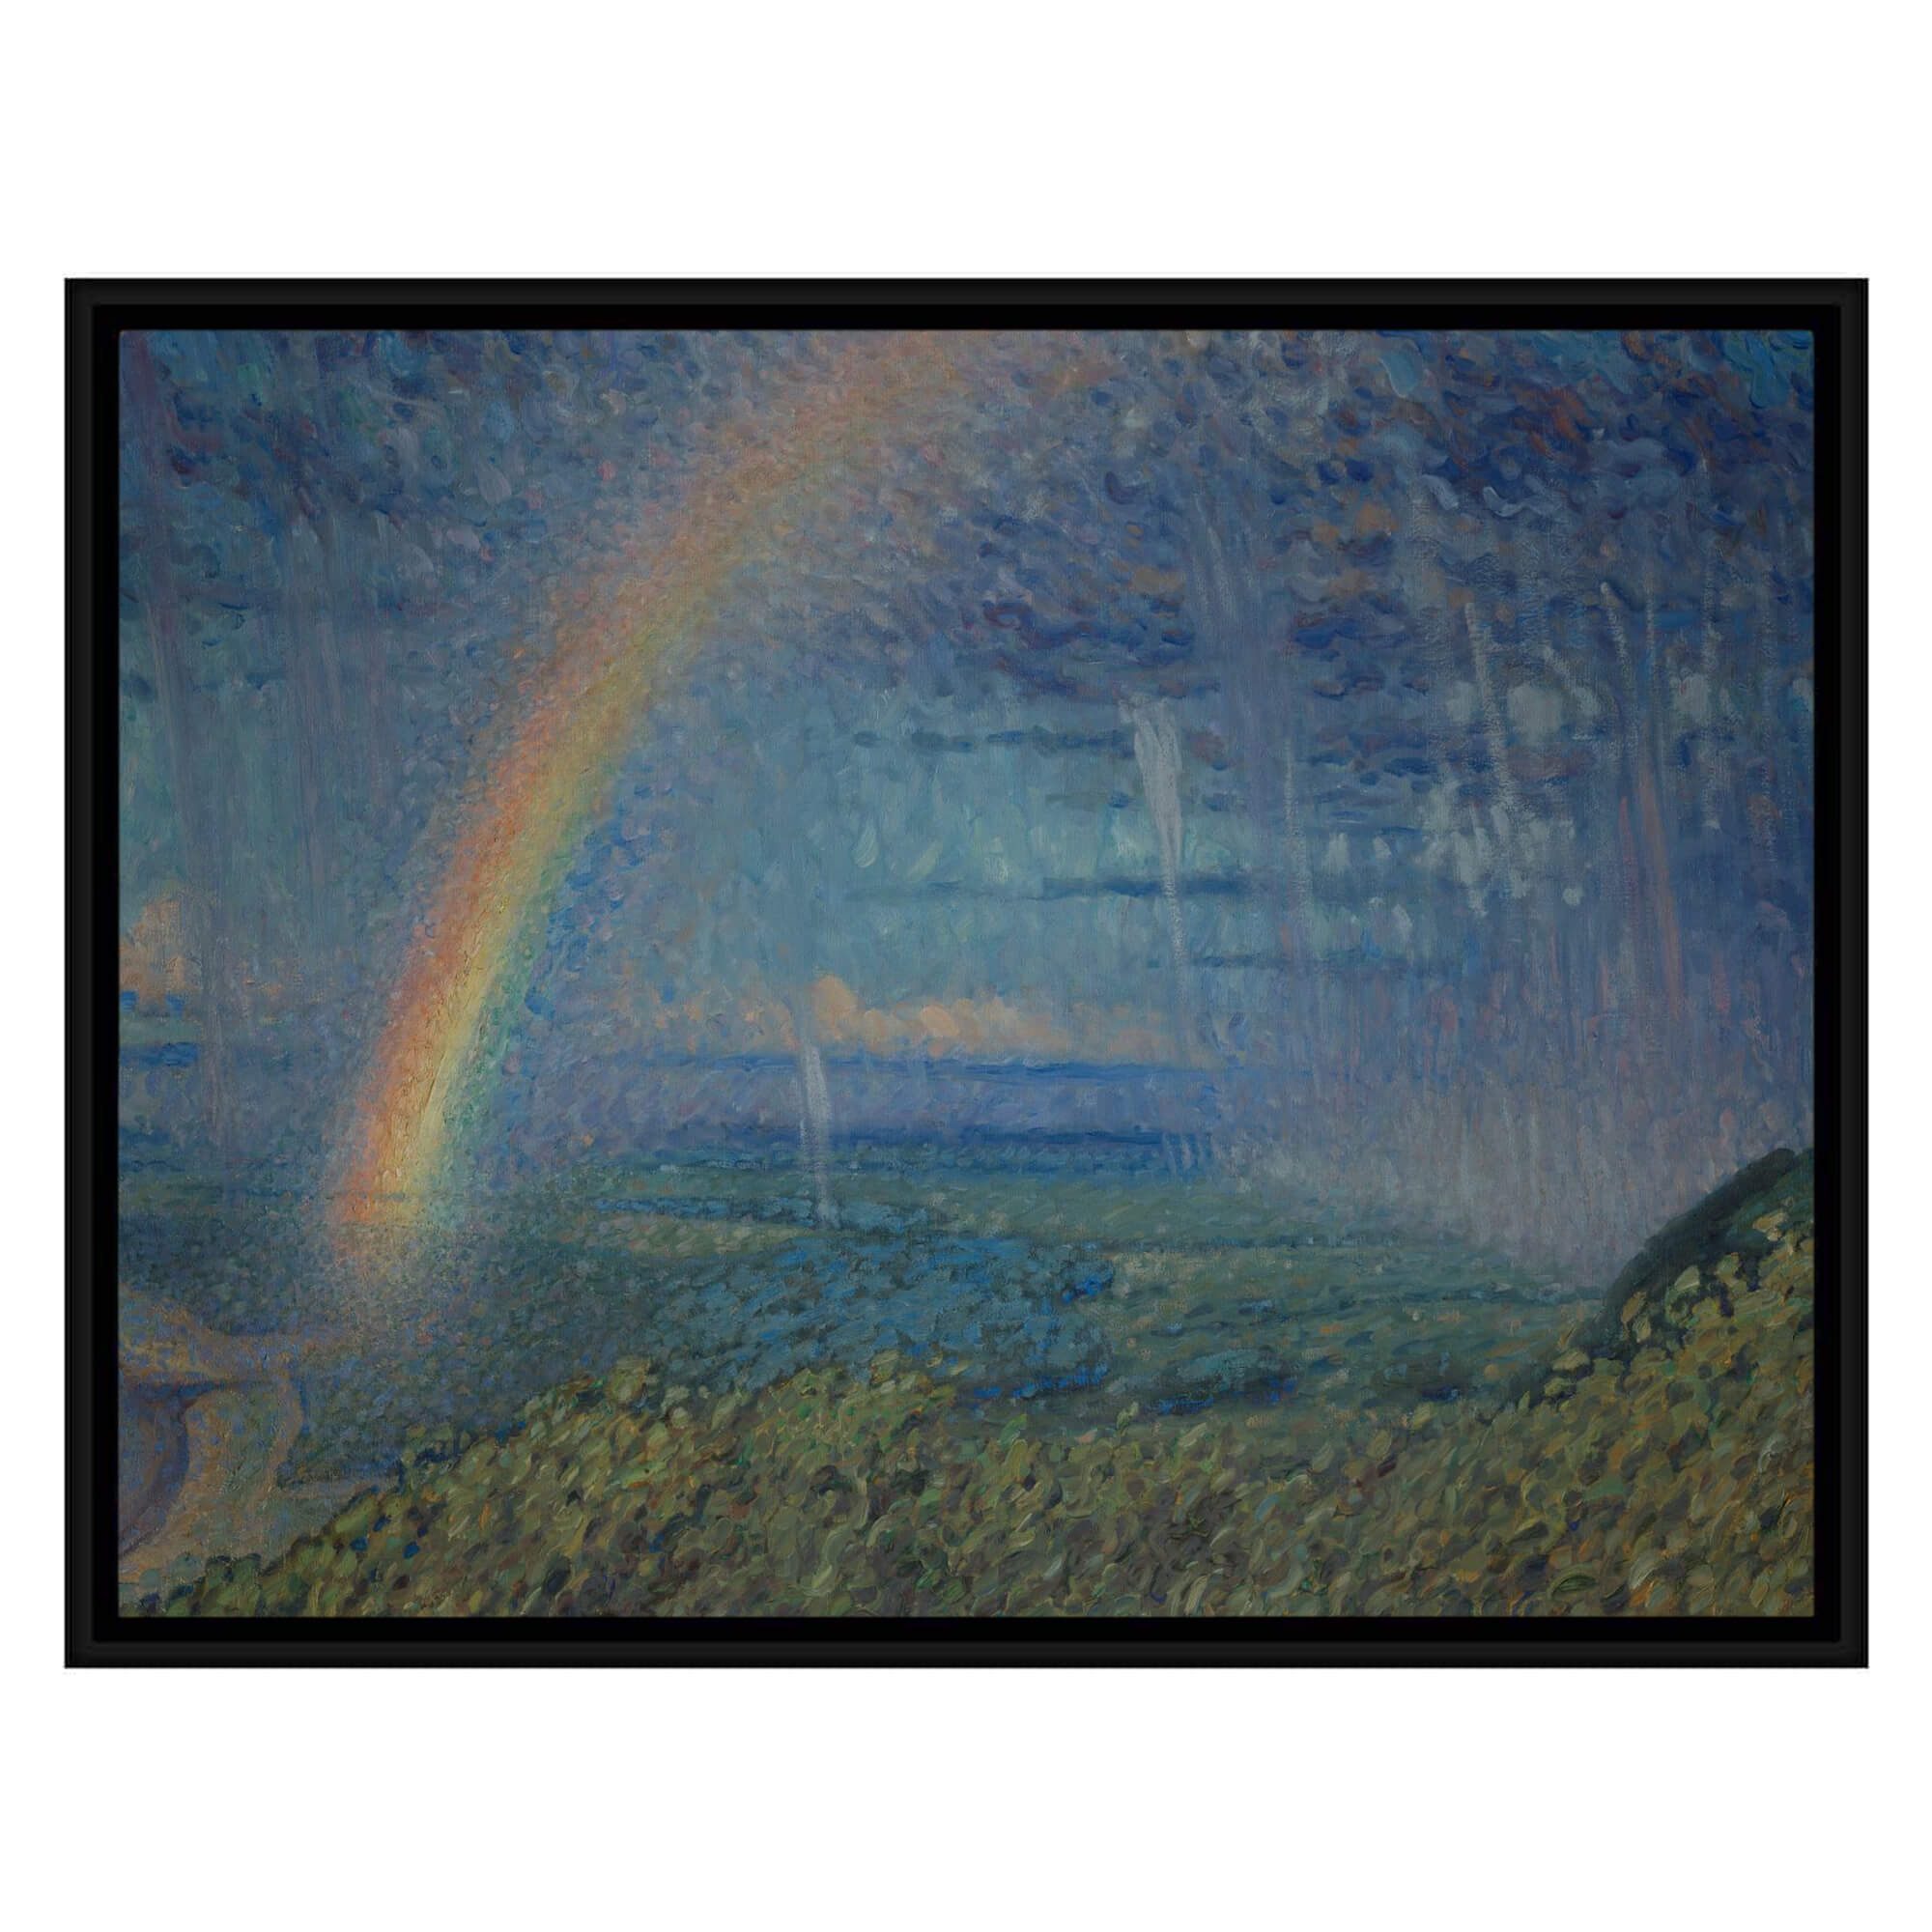 A landscape with a rainbow